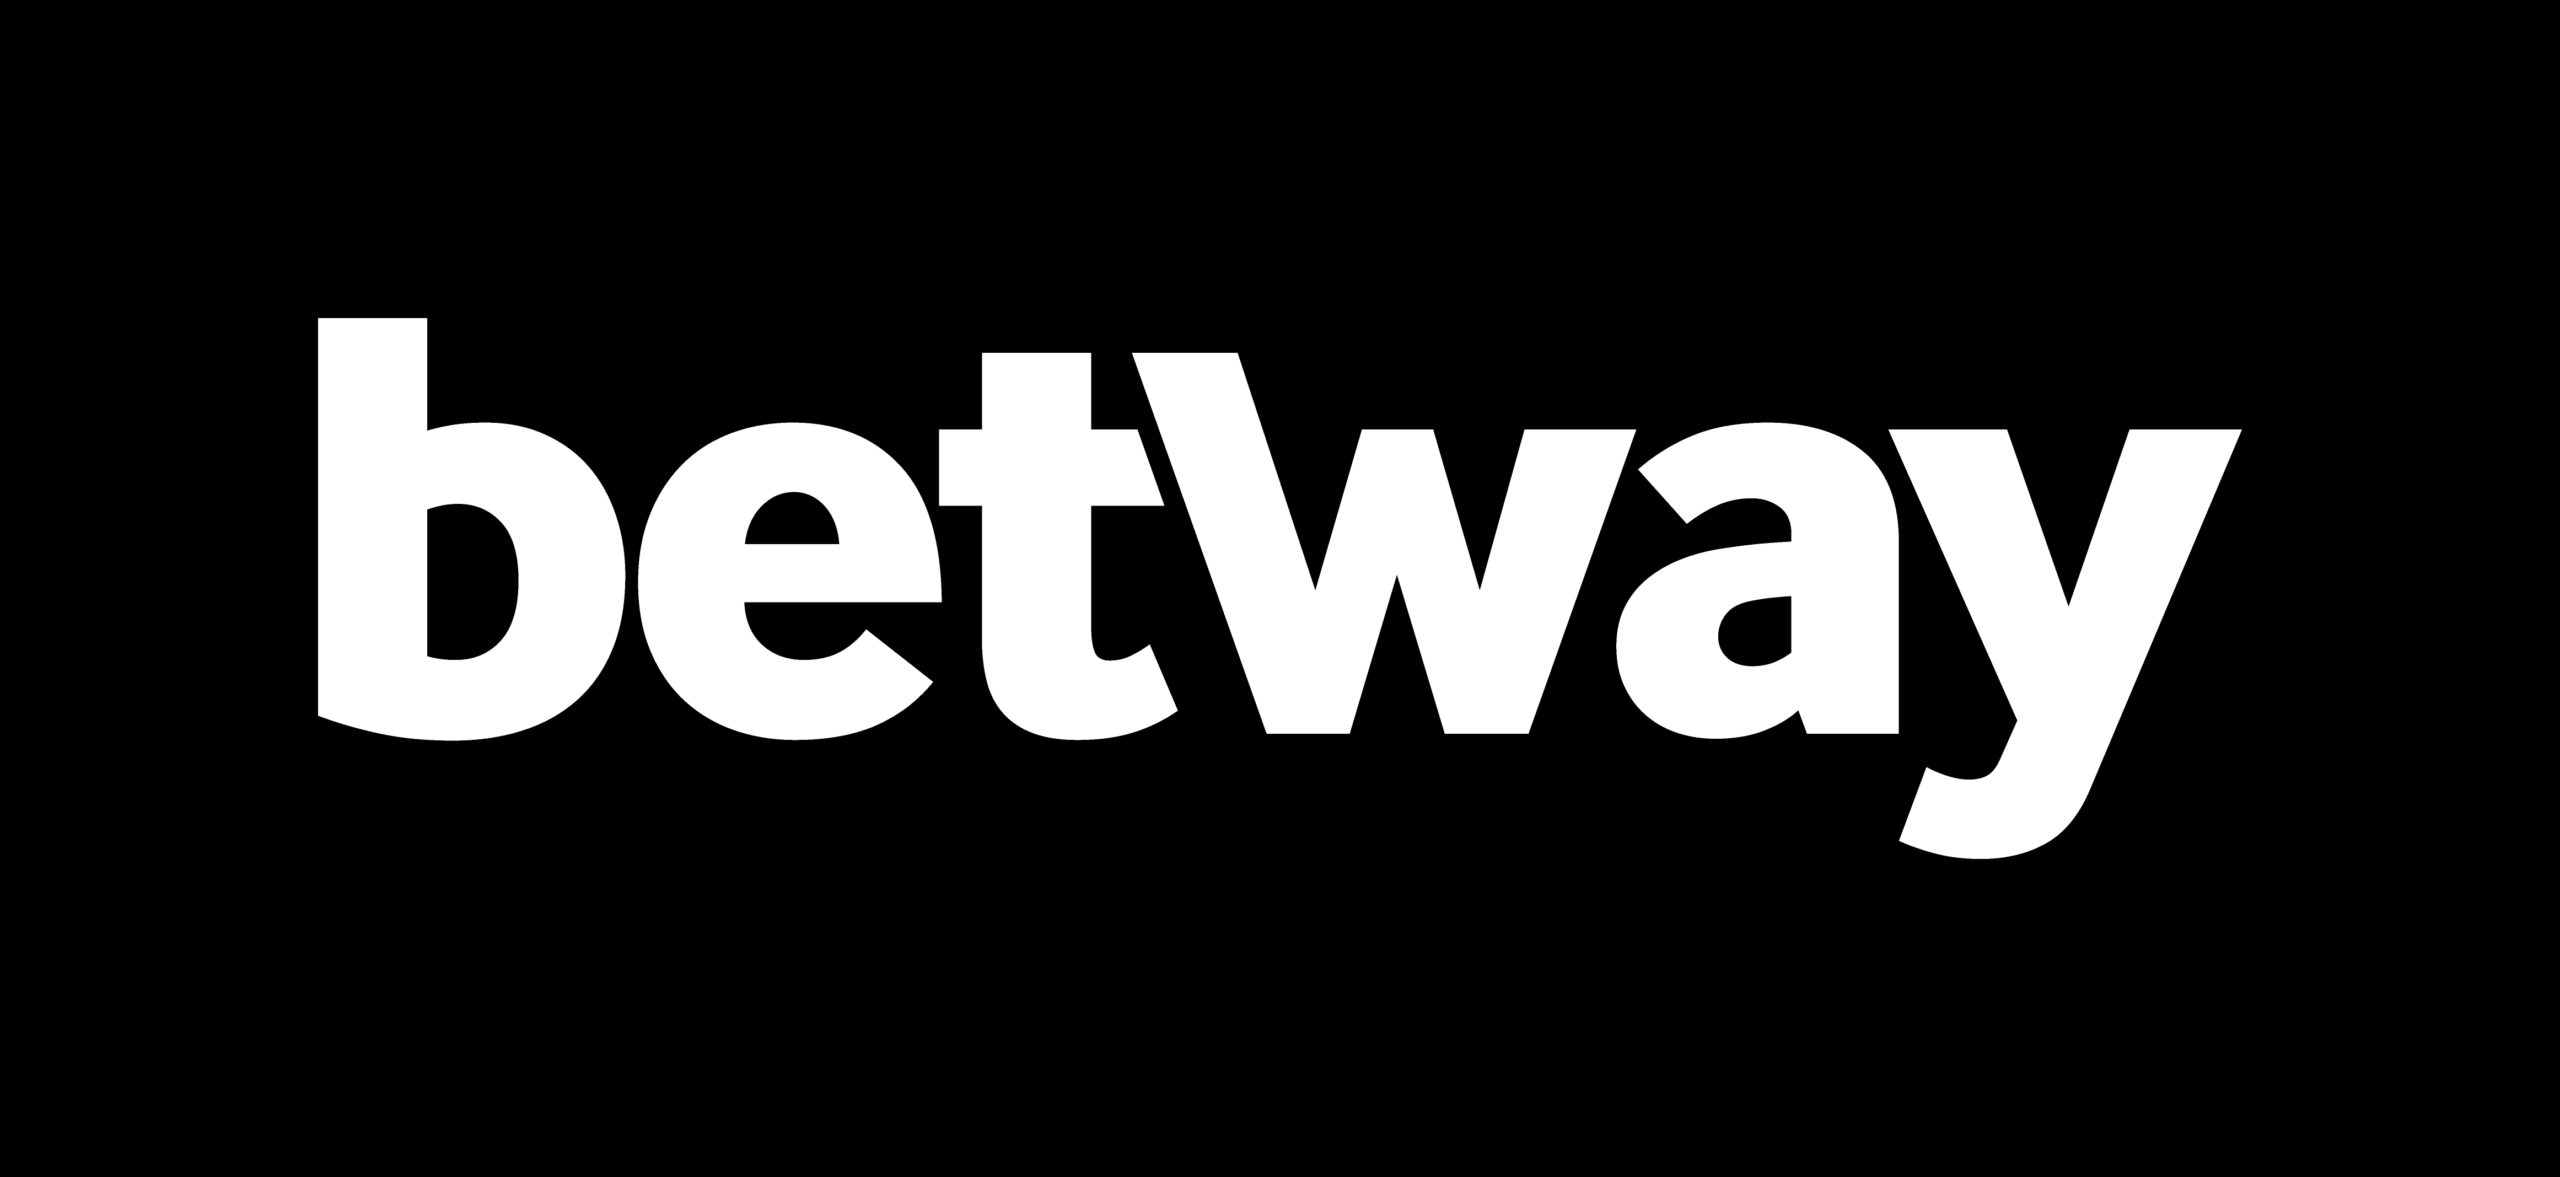 Betway logo scaled